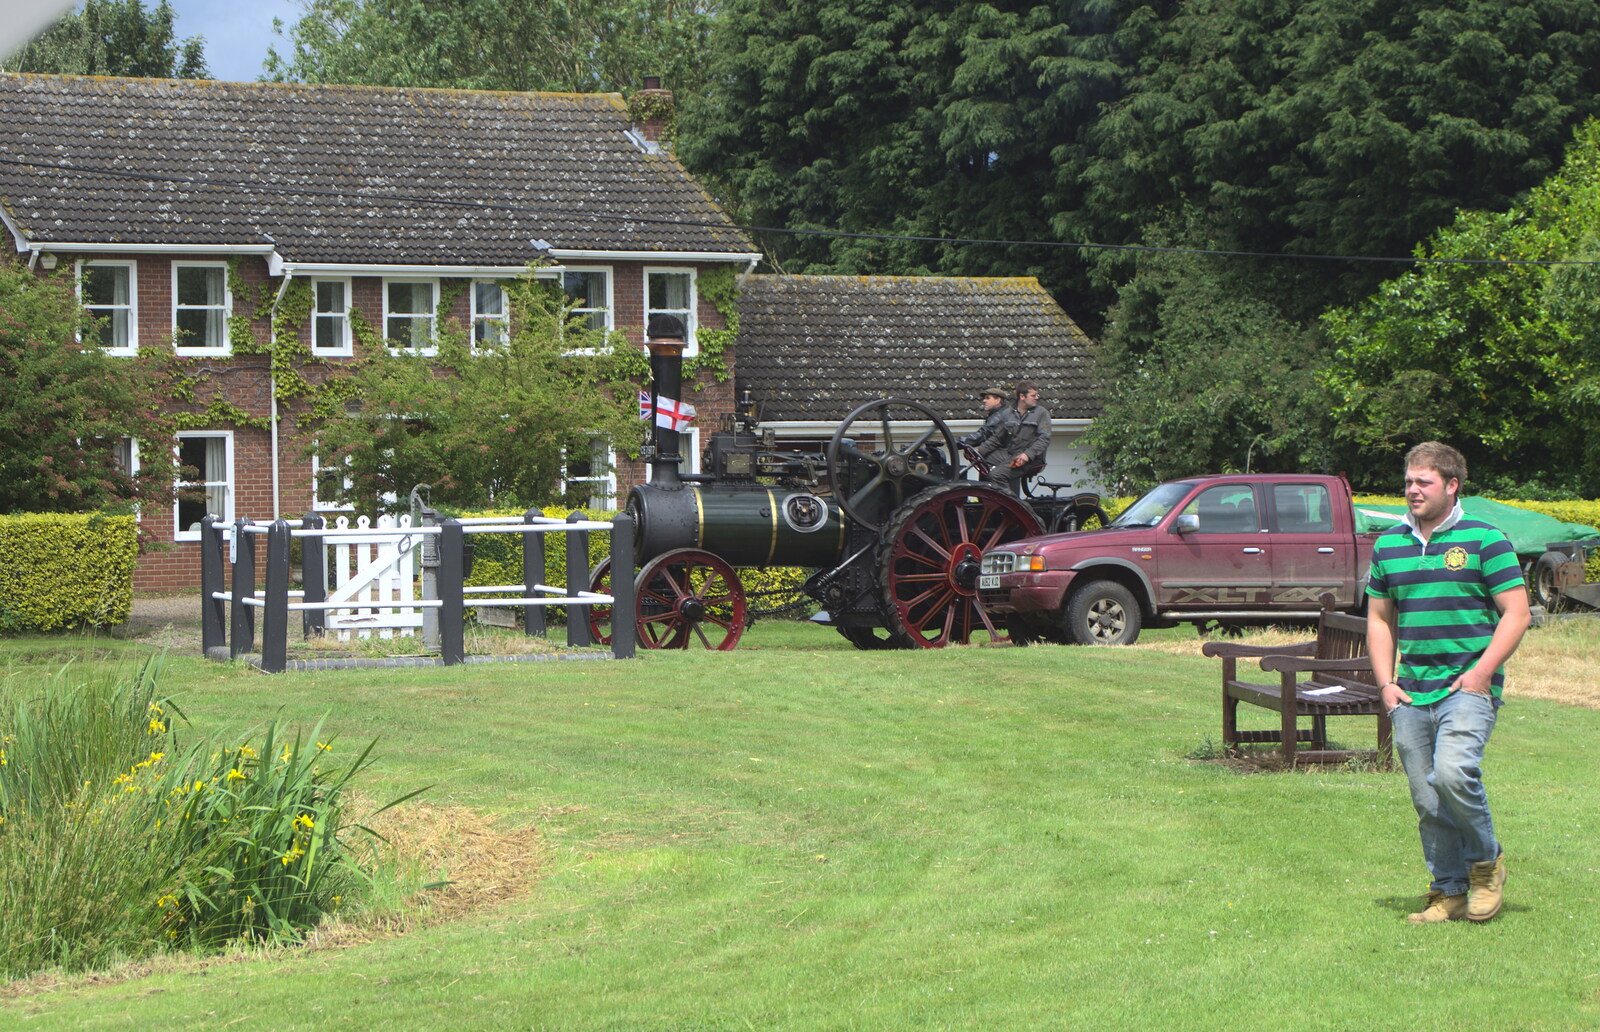 Traction engine Oliver trundles around the pond from Thrandeston Pig Roast and Tractors, Thrandeston Little Green, Suffolk - 23rd June 2013